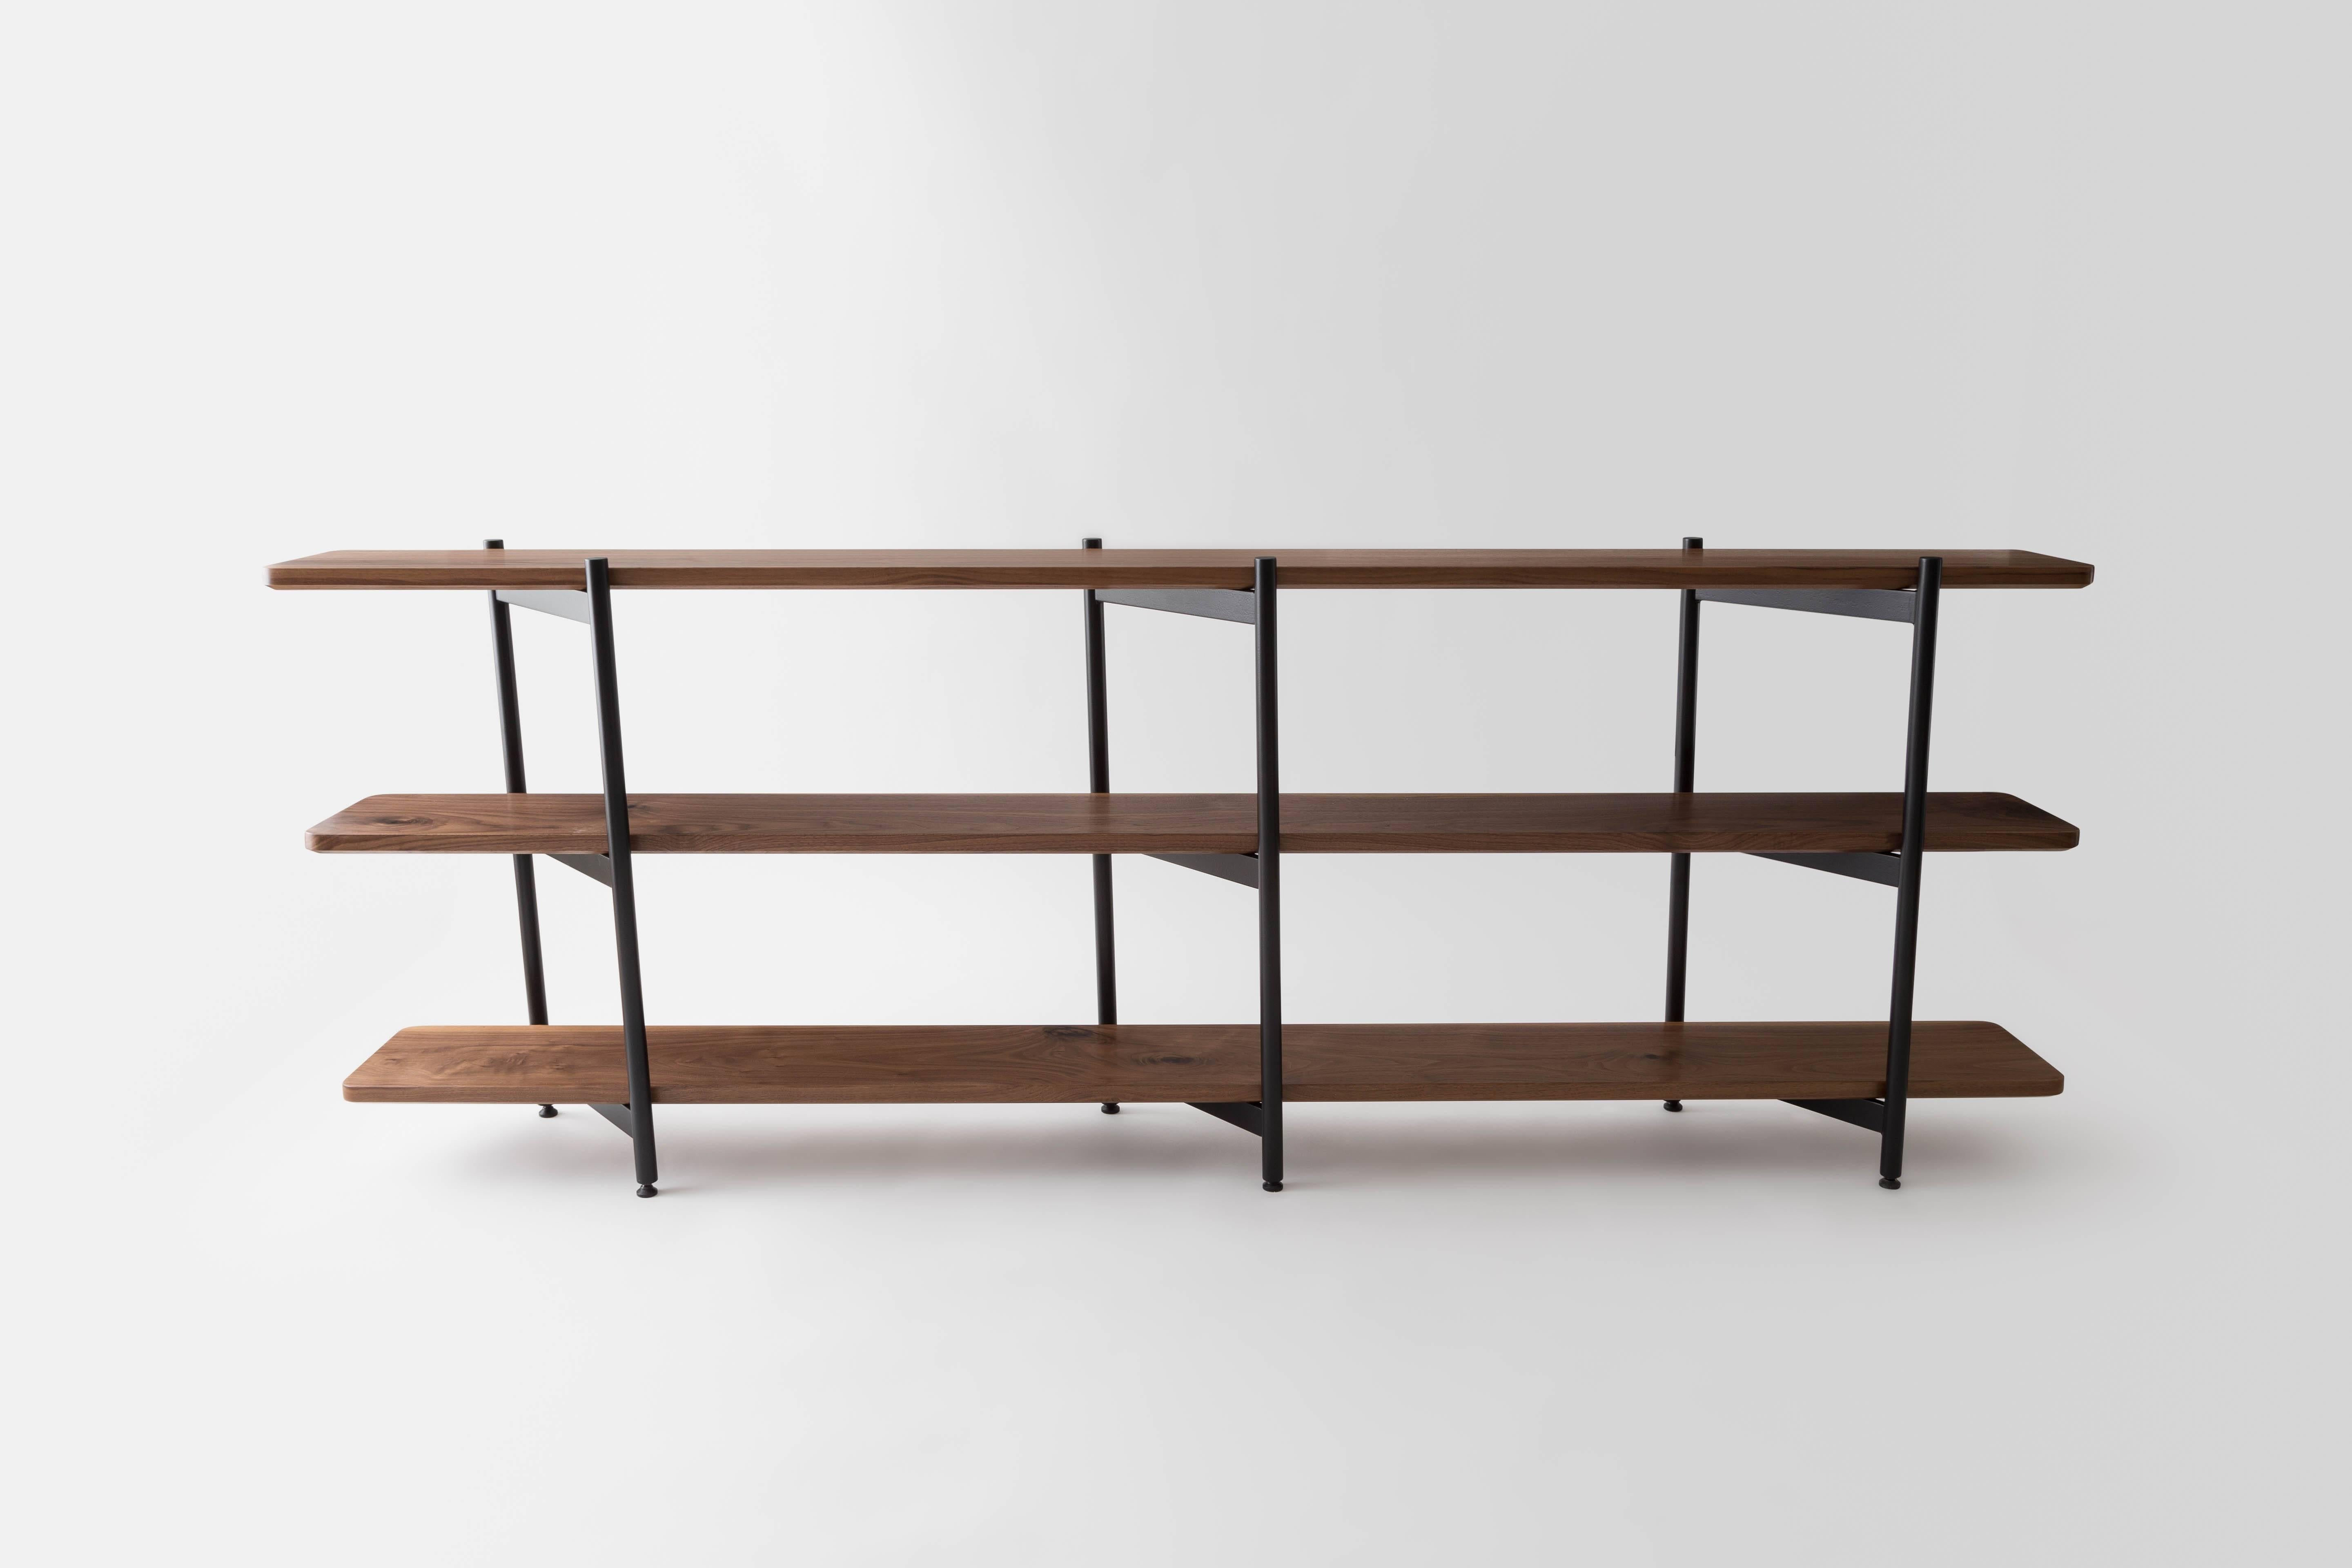 The Gordo bookcase is constructed in our Brooklyn studio and local partners using premium domestic hardwoods and powder coated steel. The angled legs allow the shelving unit to be freestanding without the need of a back support so it can be accessed